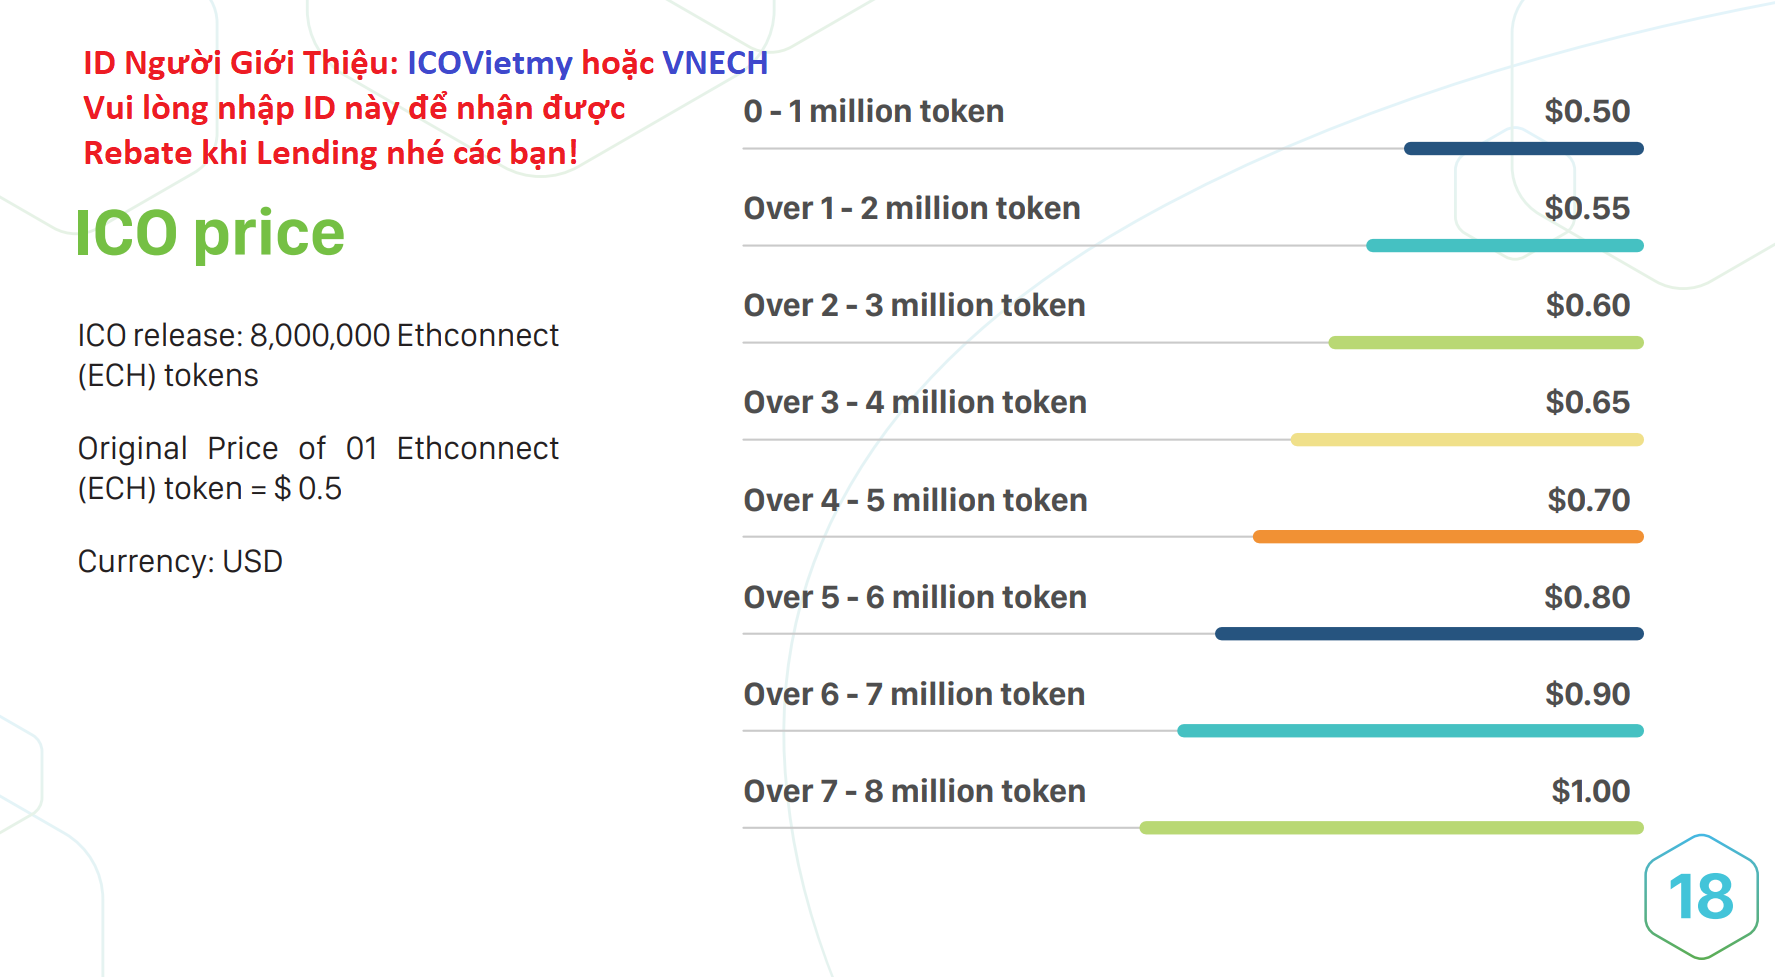 Ethconnect.vn - ECH Phat hanh ICO.png